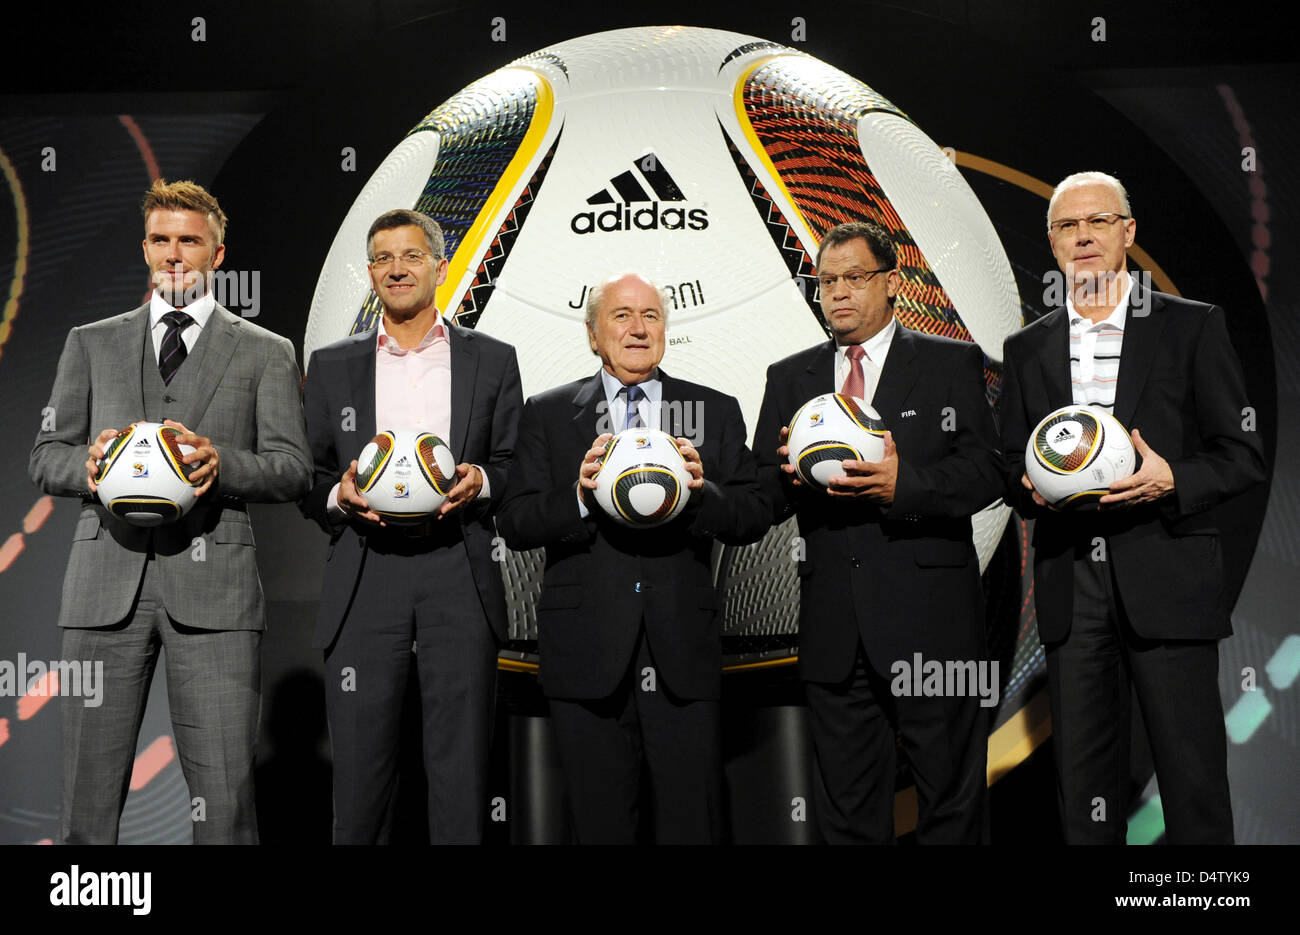 (L-R) England international David Beckham, adidas CEO Herbert Hainer, FIFA President Joseph Blatter, Danny Jordaan, managing director of the organisation committee, and German soccer legend Franz Beckenbauer pose as Jabulani, the official ball for the FIFA 2010 World Cup South Africa, is handed over in Cape Town, South Africa, 04 December 2009. Jabulani is produced by German compan Stock Photo